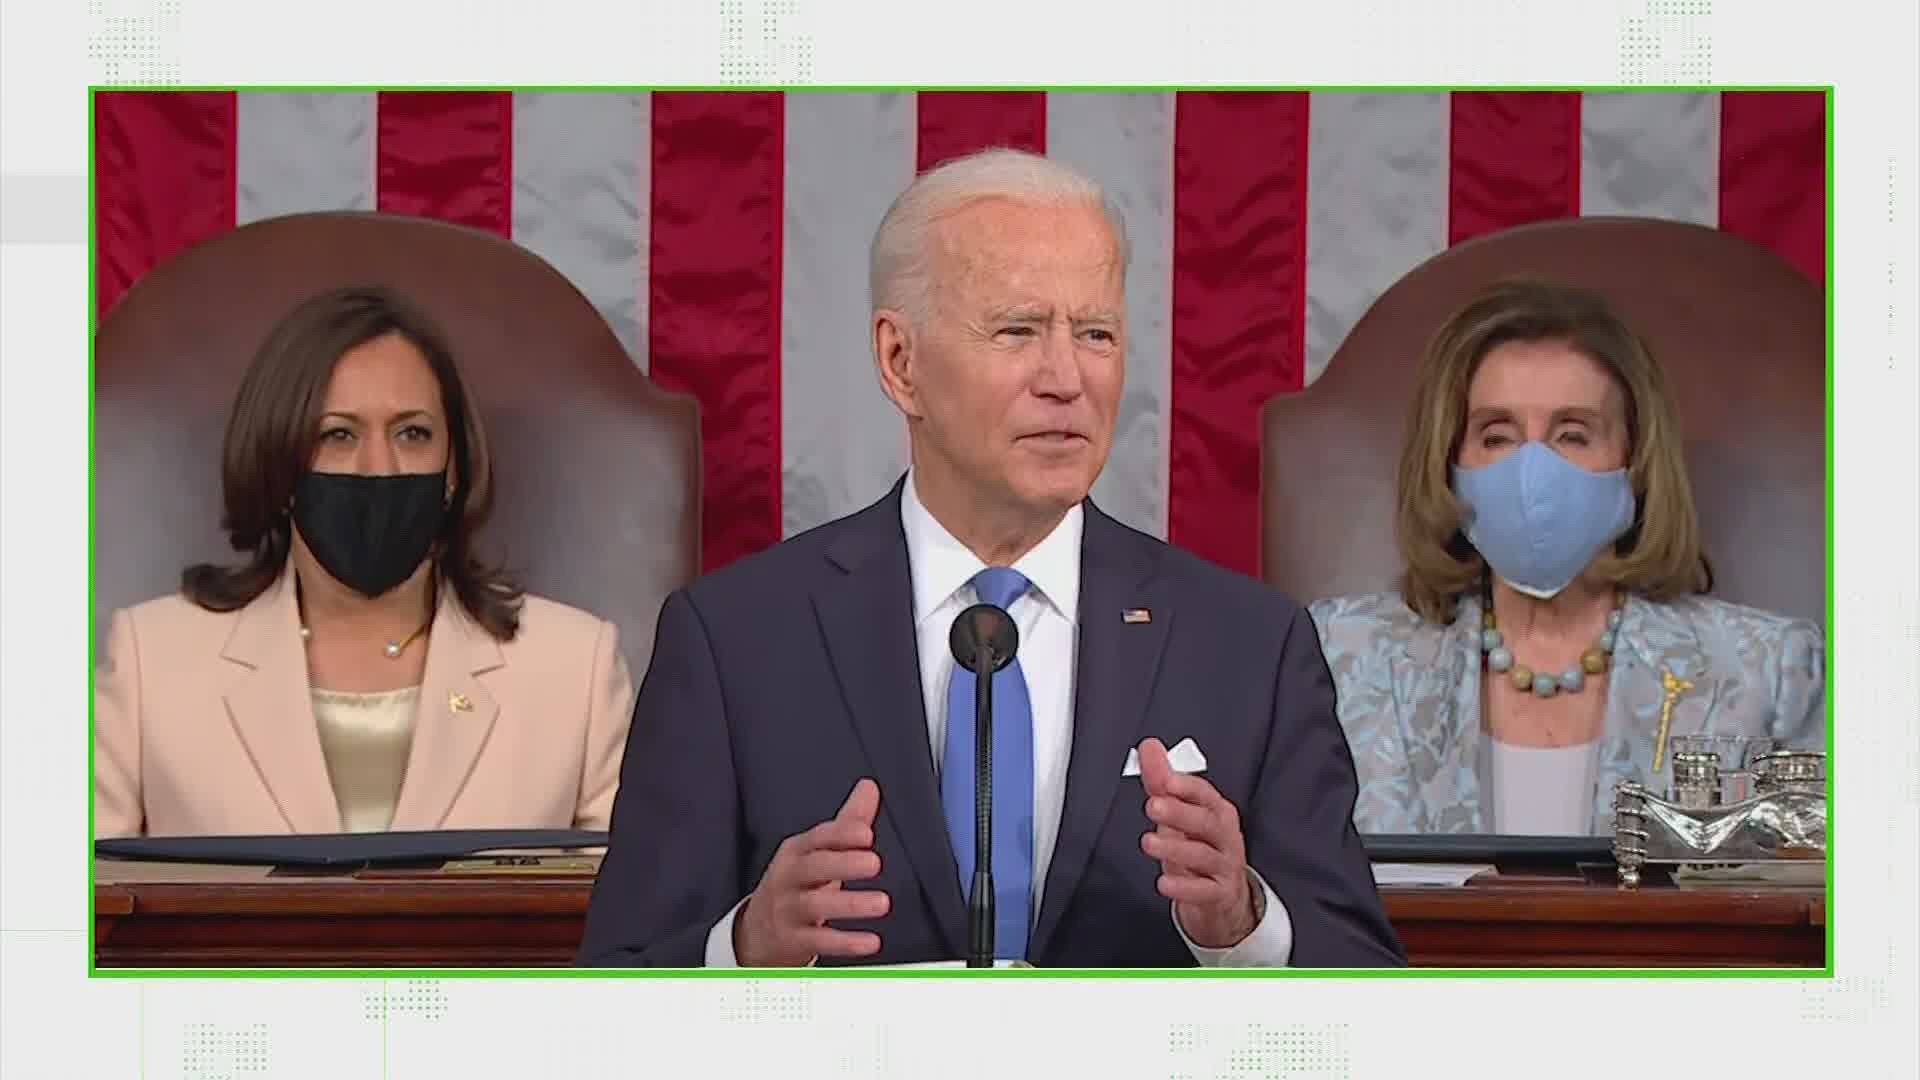 Our VERIFY team fact-checked claims made by President Joe Biden in his first address to a joint session of Congress.